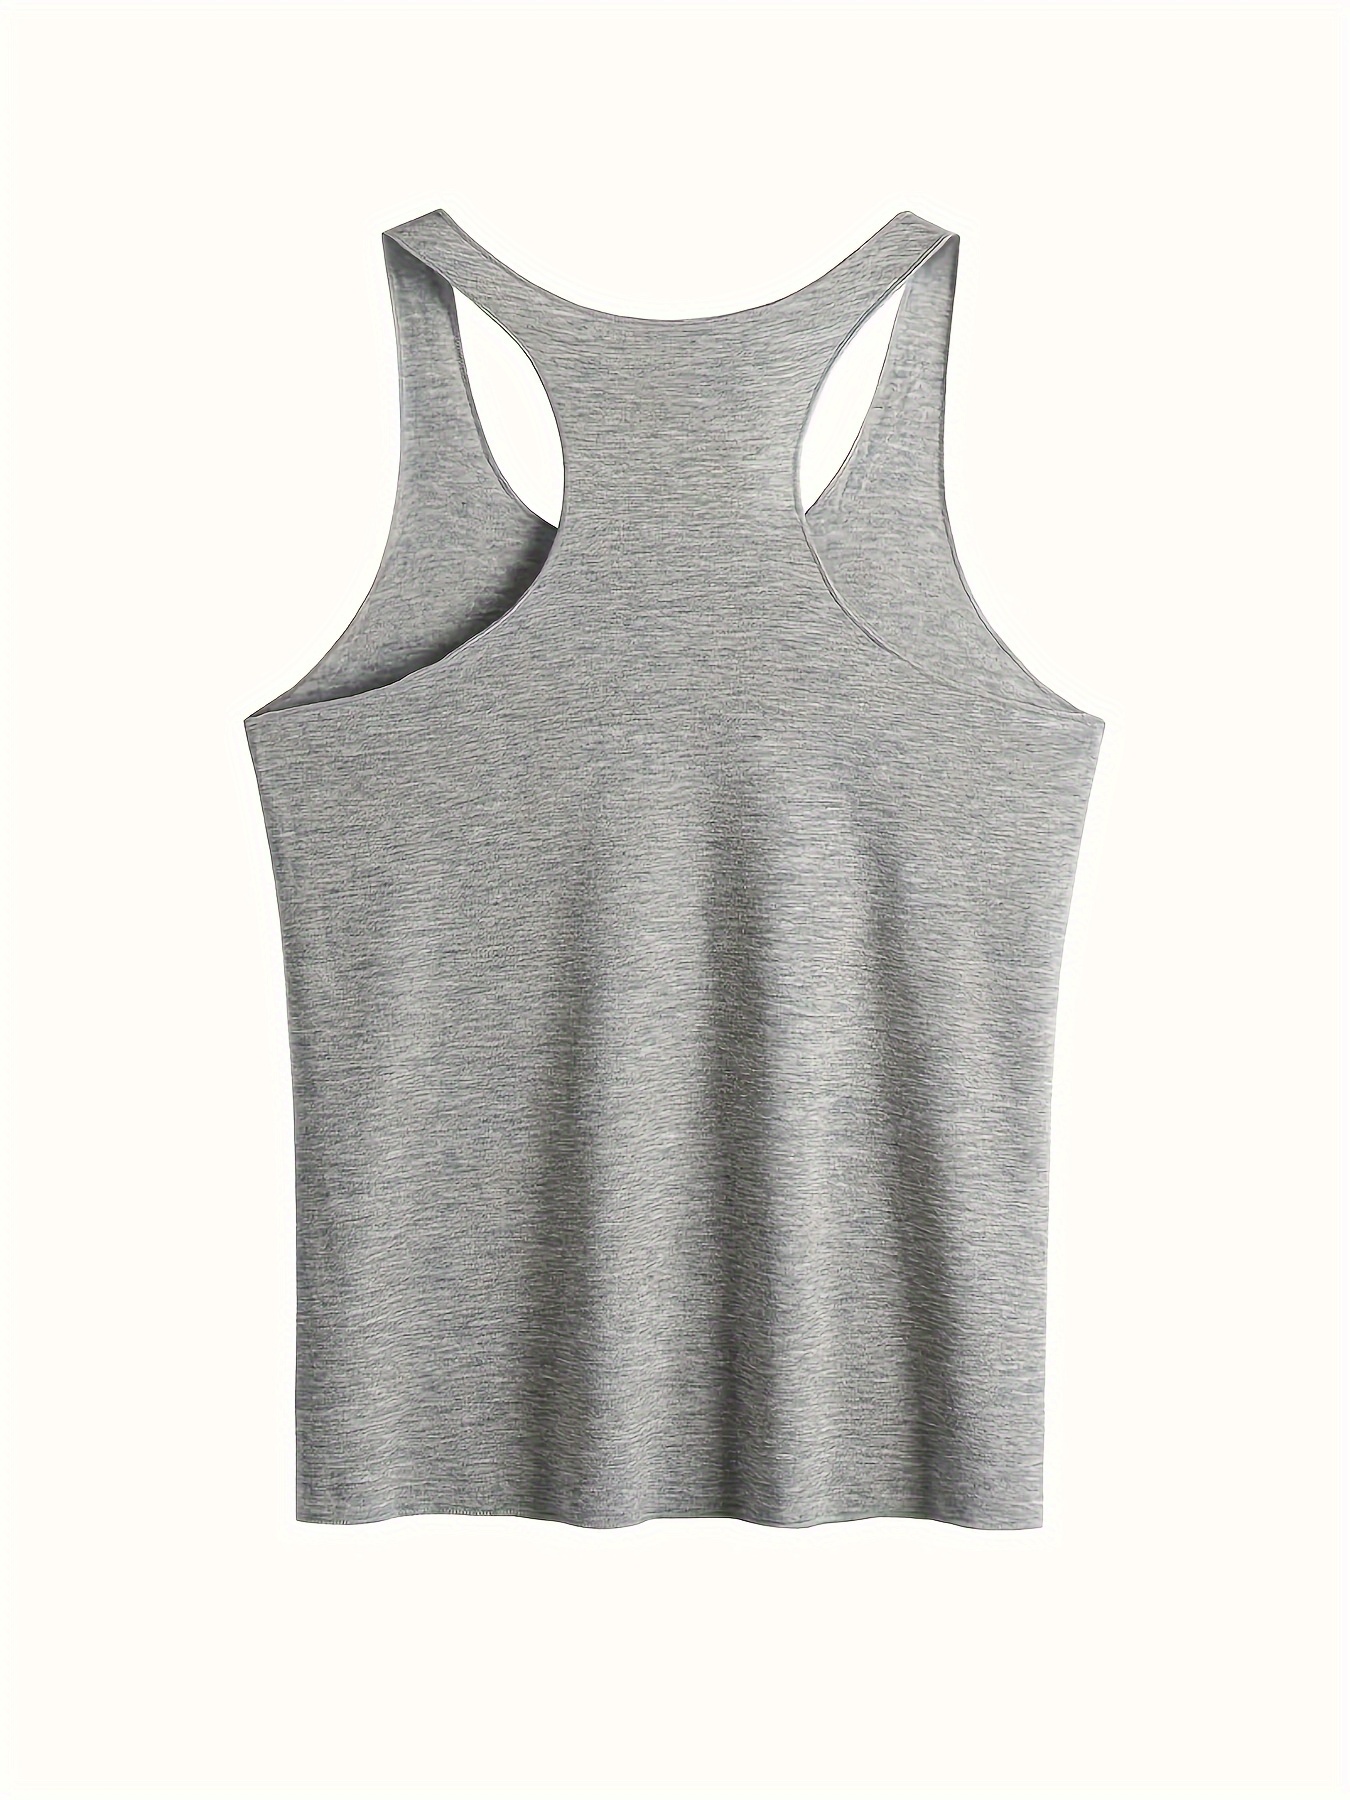 Gray Printed Tank Top for Women/ Fitness Tank Top for Ladies